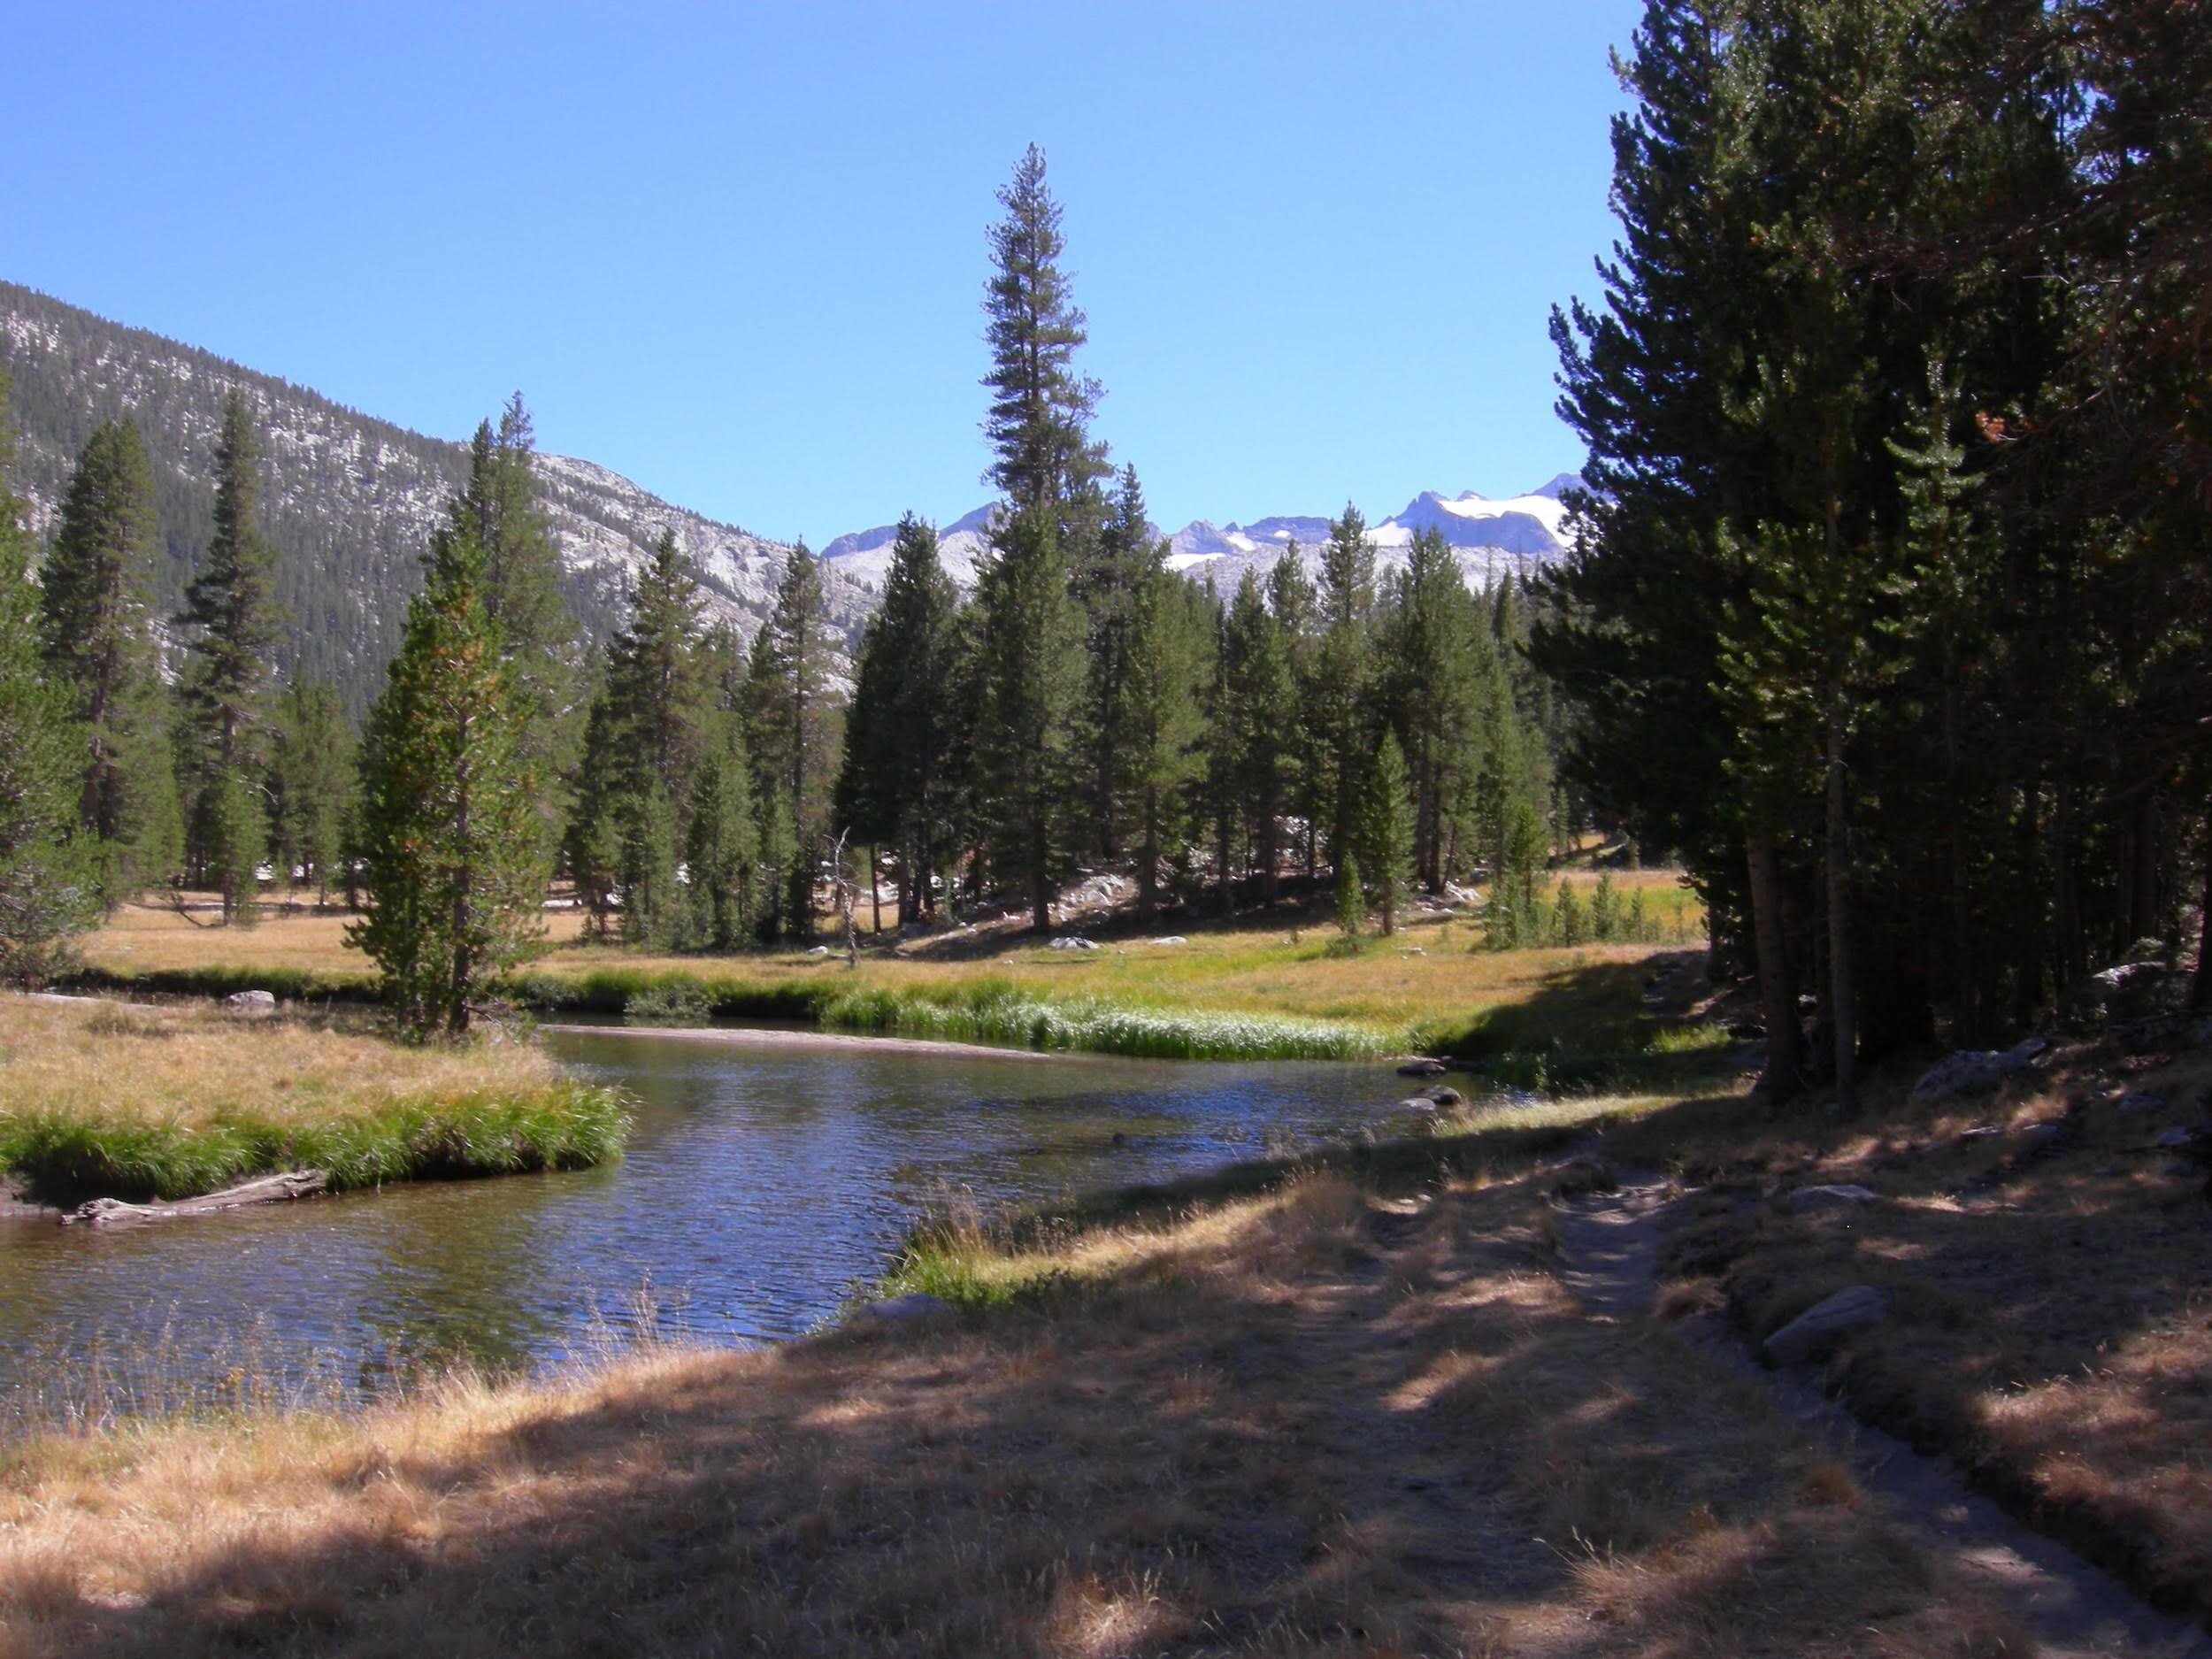 Lyell Fork of the Tuolumne looking towards Donohue Pass